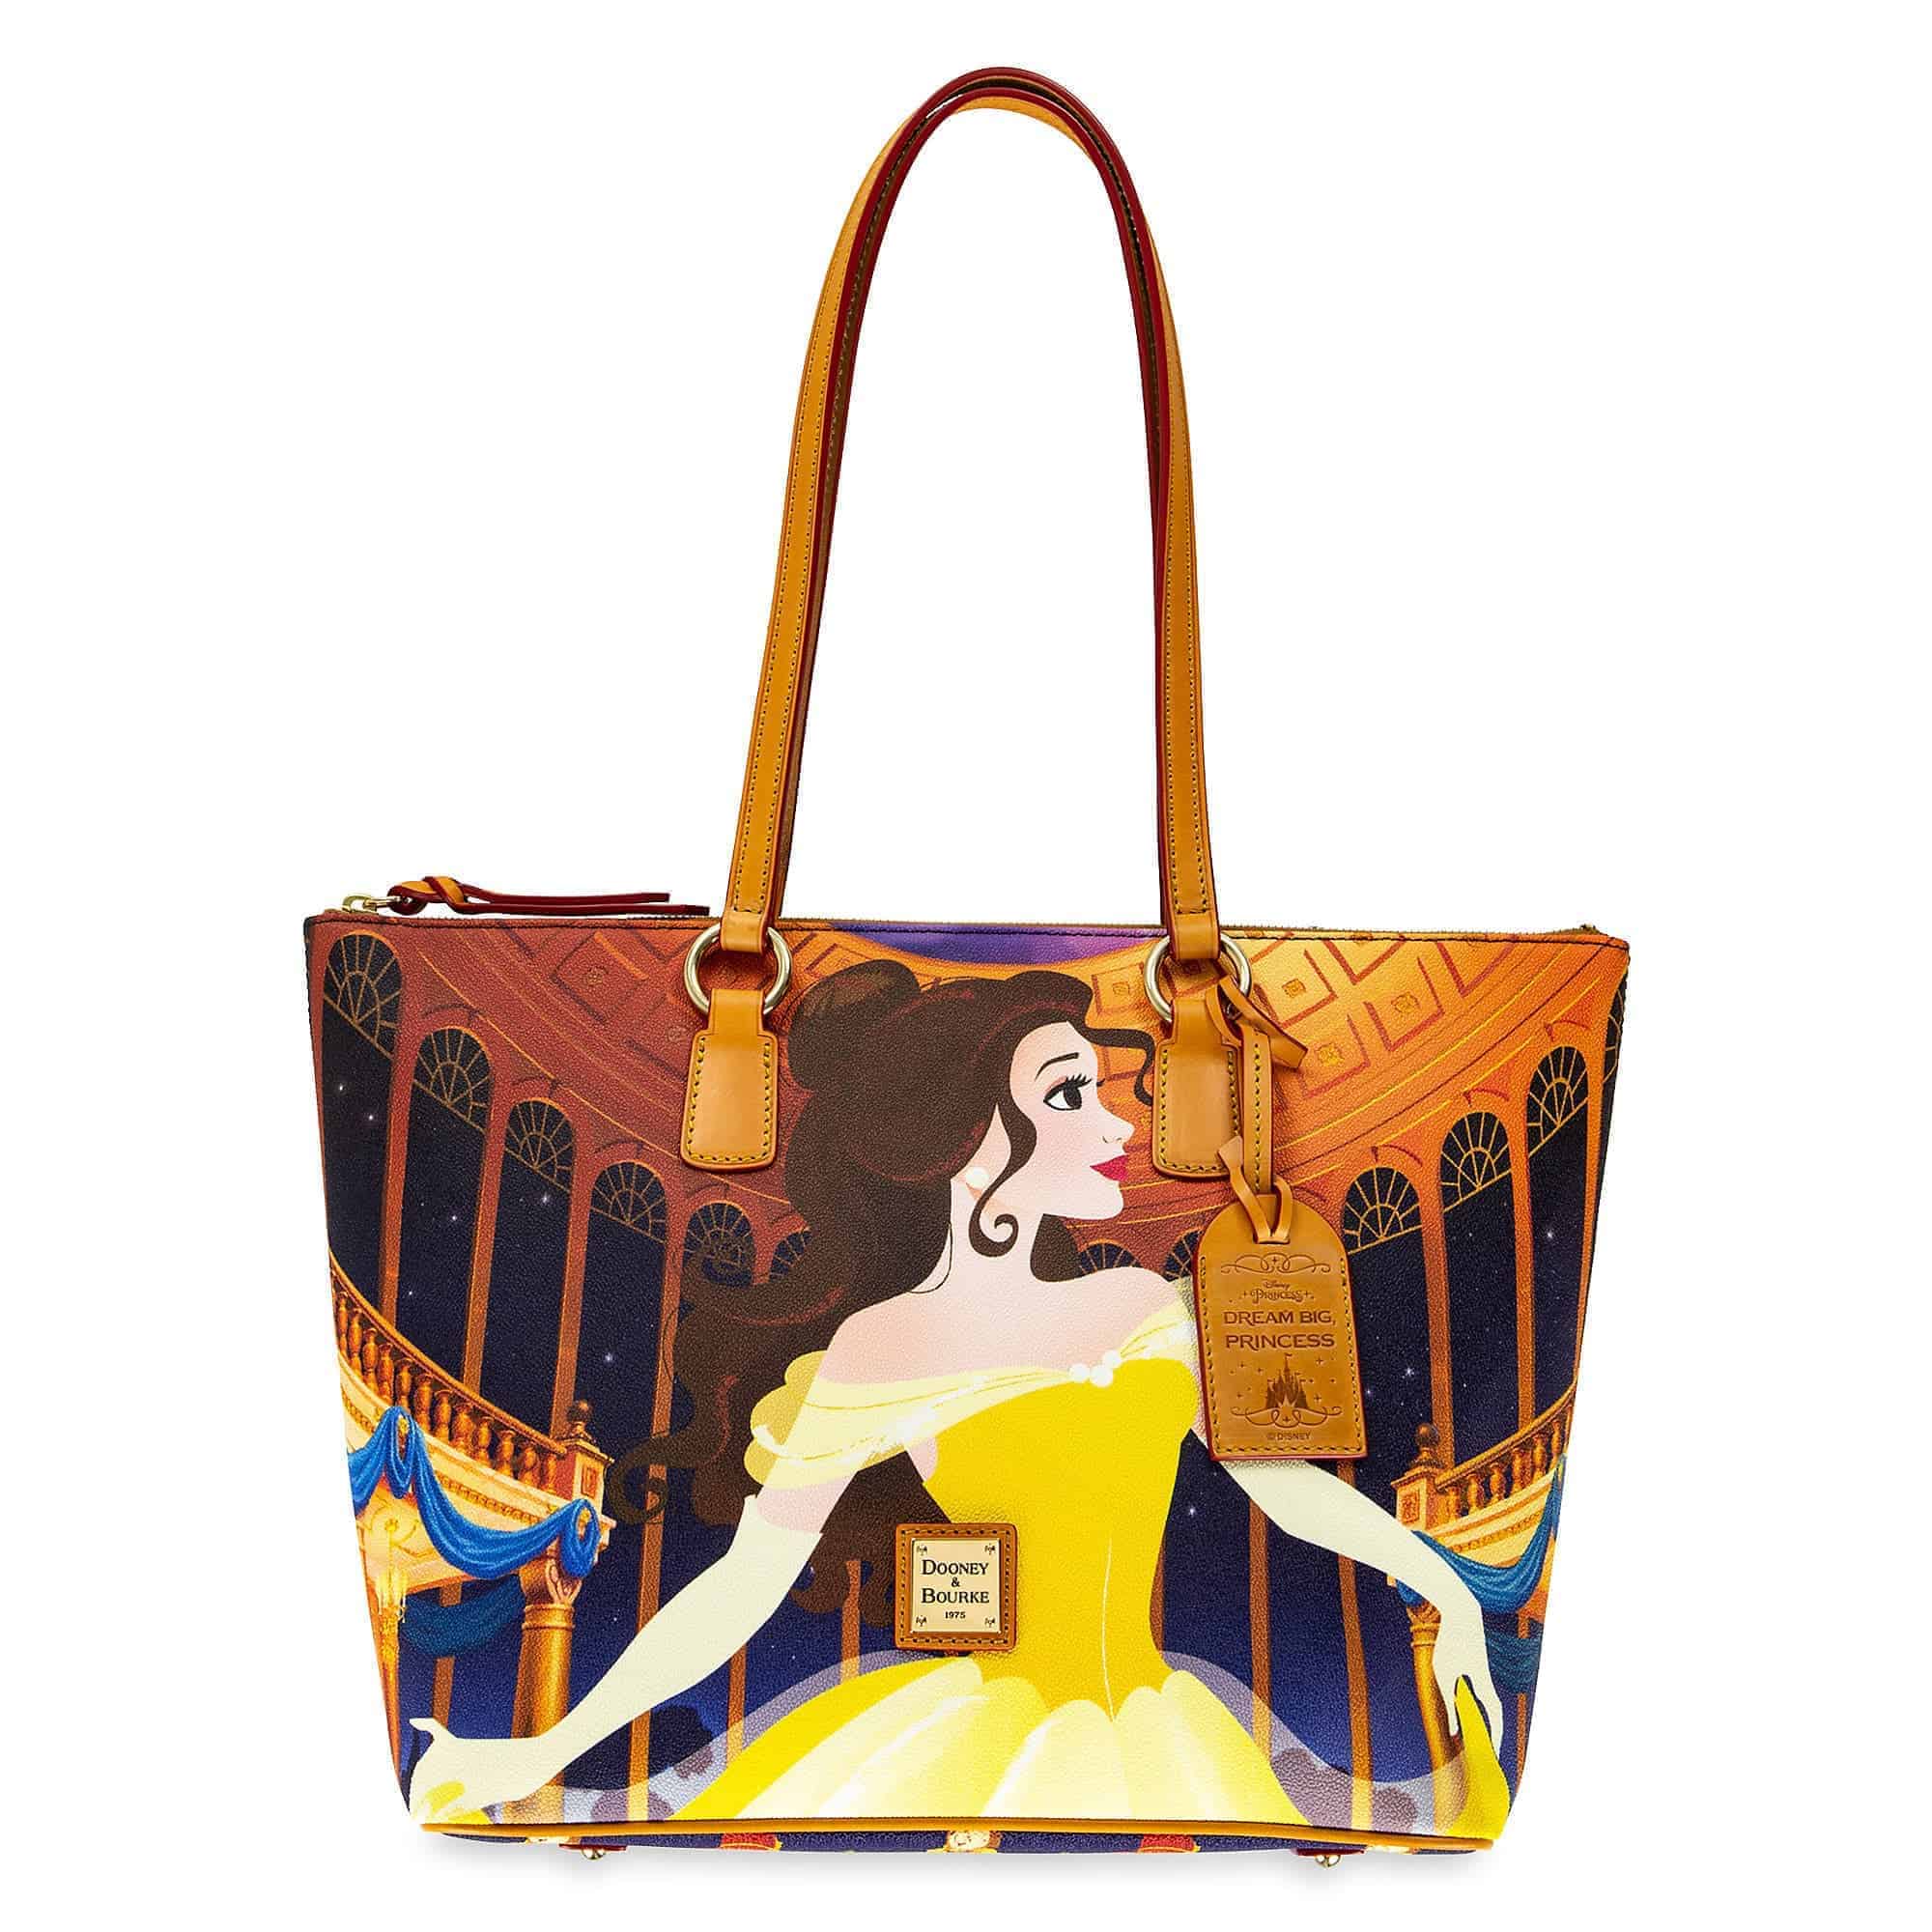 Belle Tote By Disney Dooney And Bourke